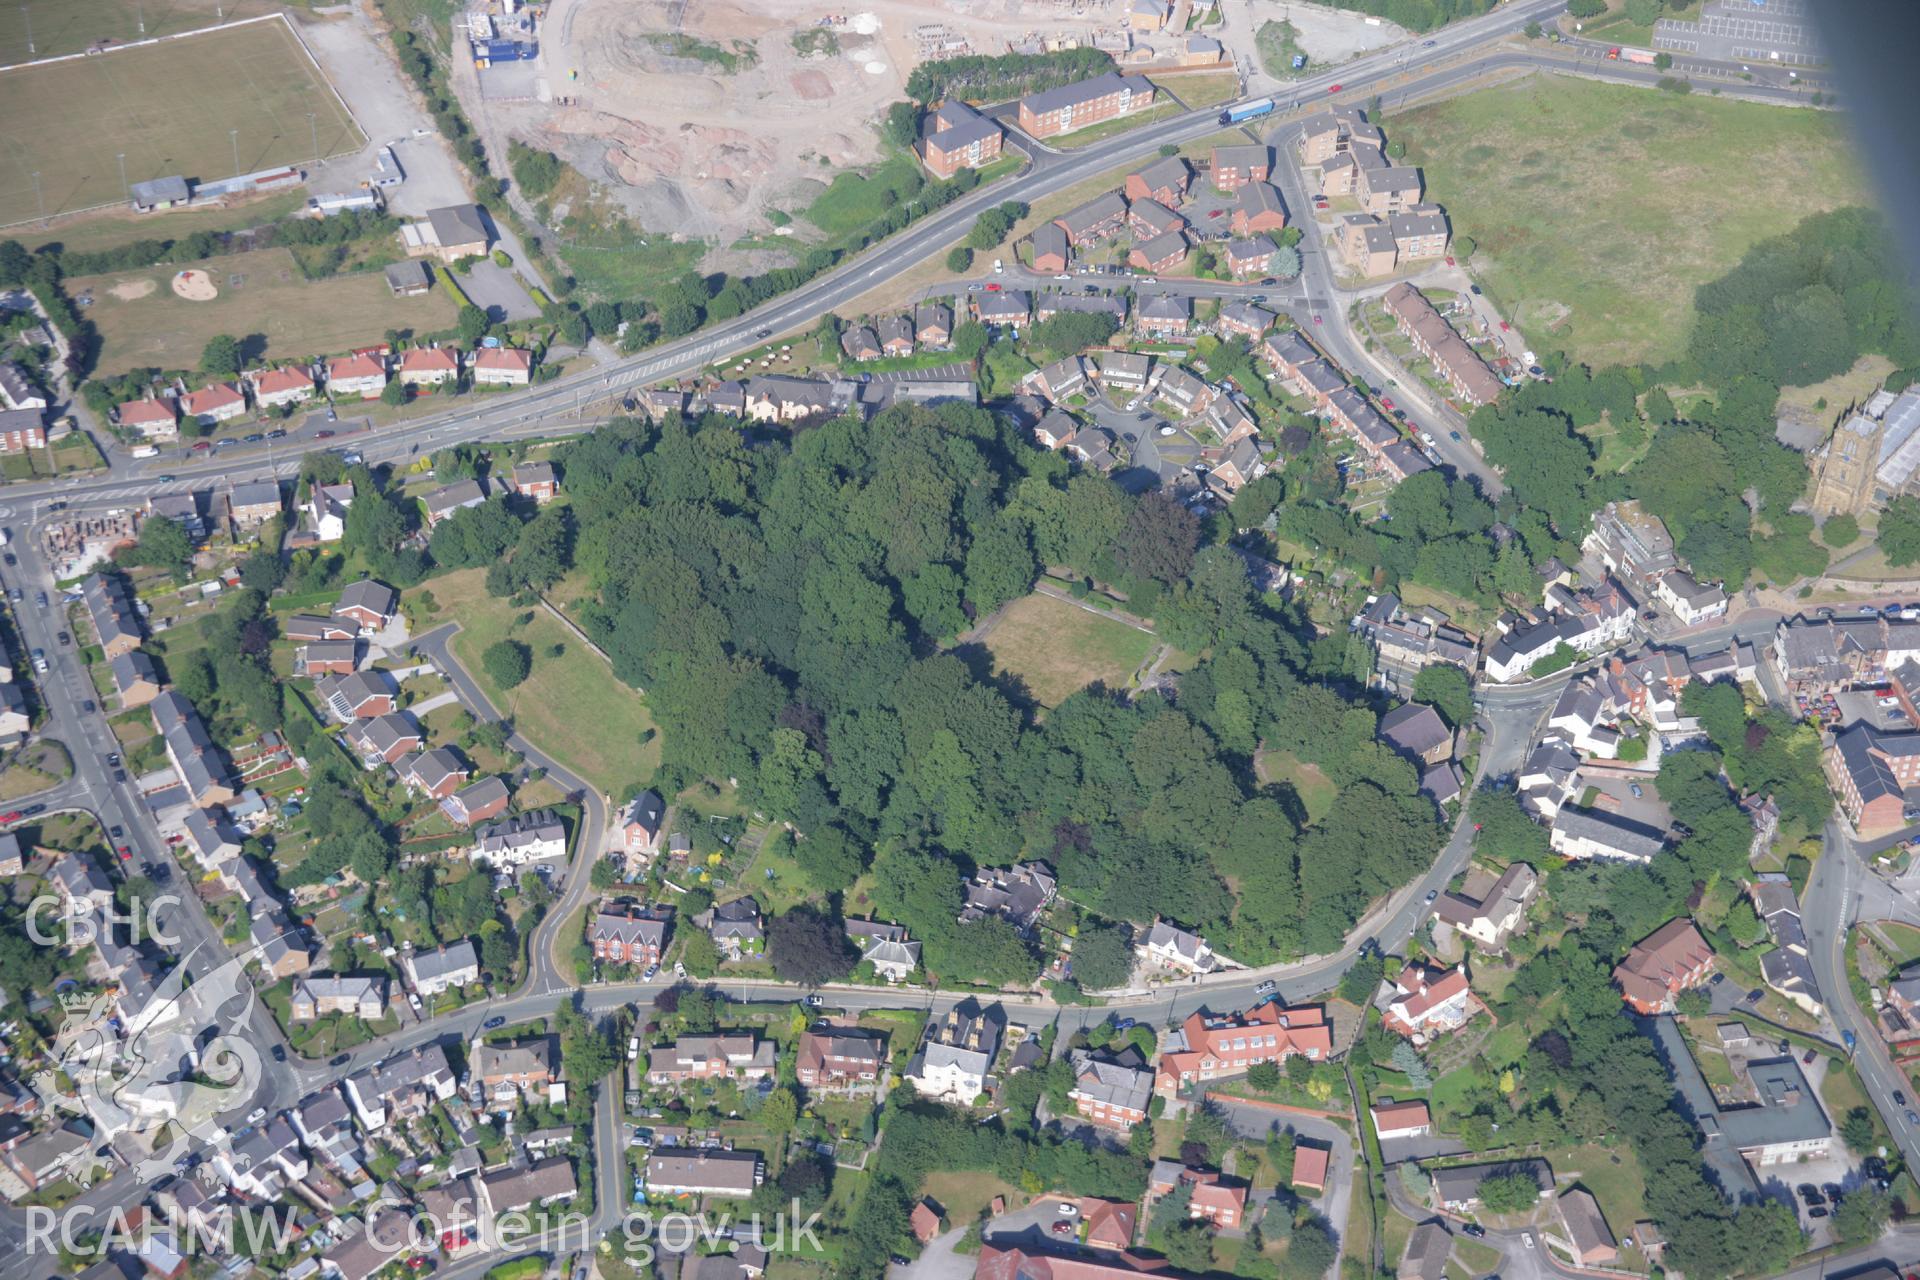 RCAHMW colour oblique aerial photograph of Mold Castle. Taken on 17 July 2006 by Toby Driver.